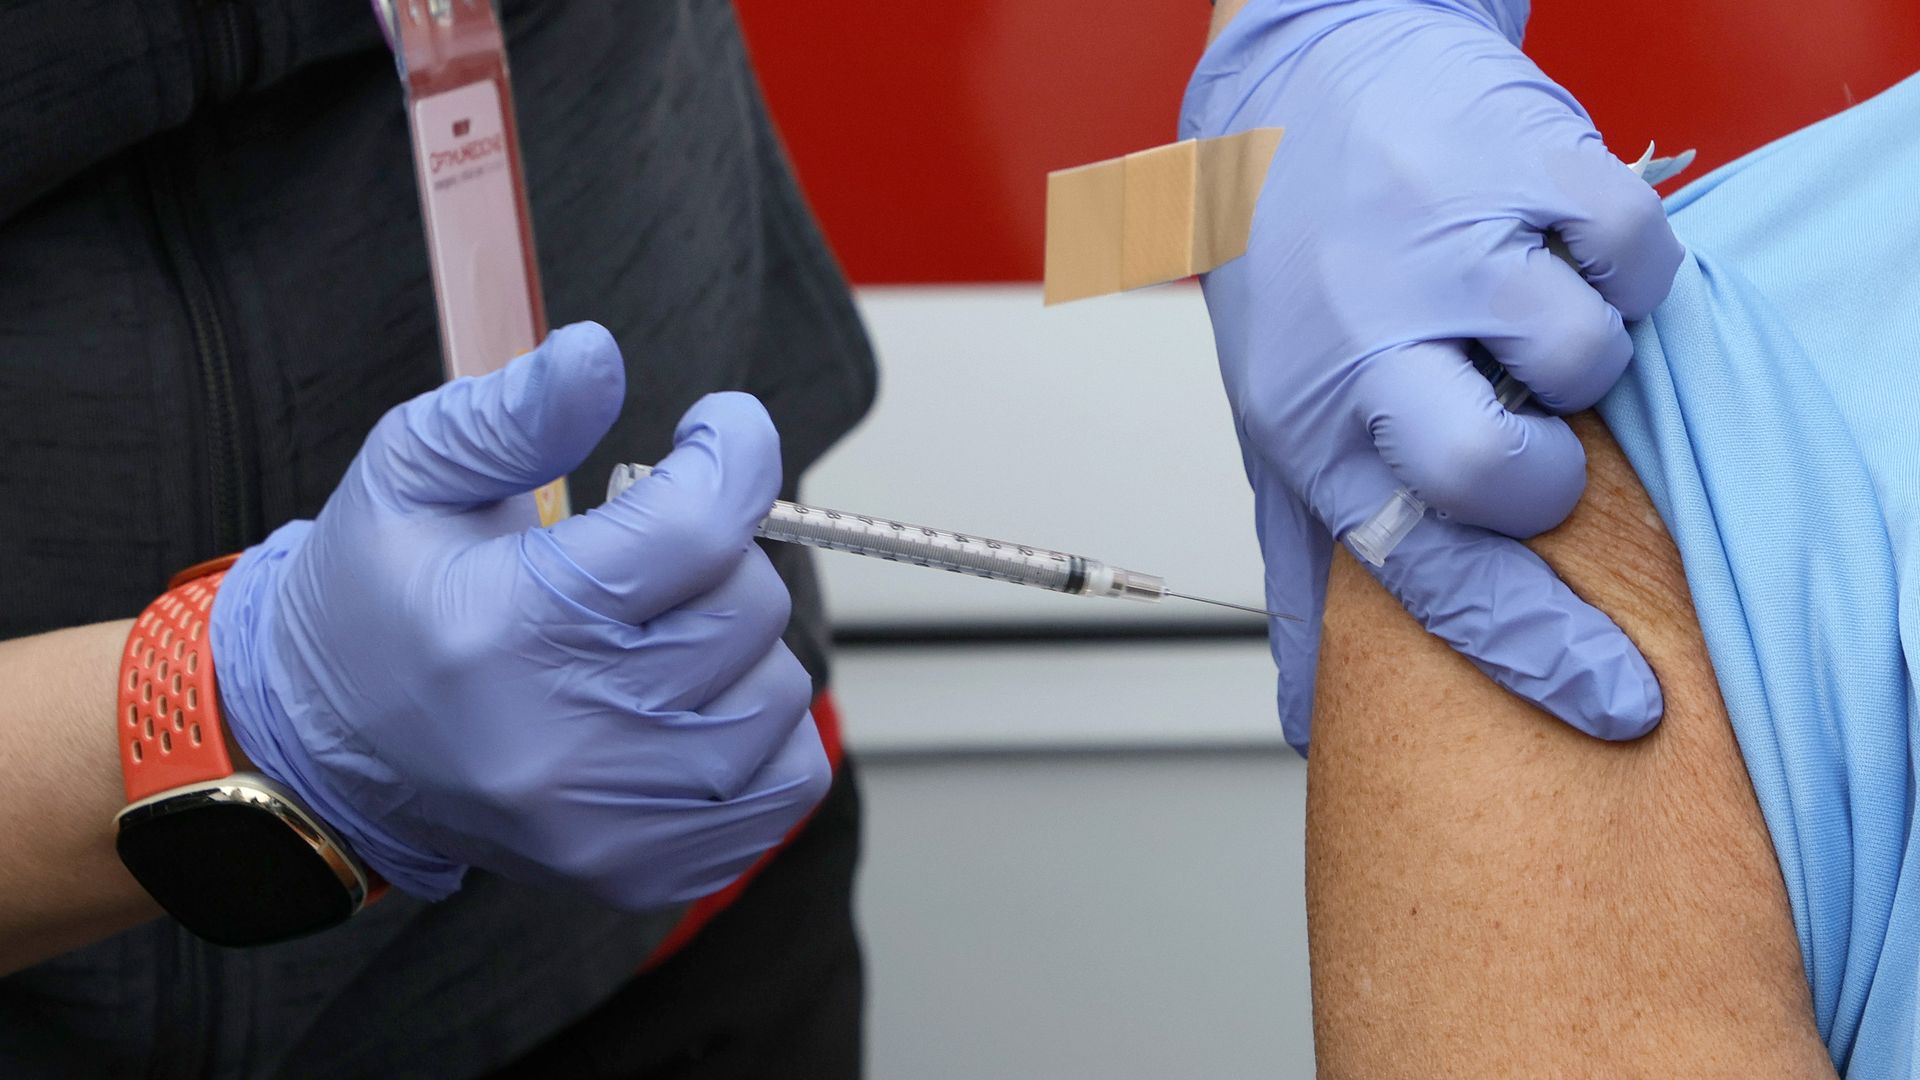 Picture the hands of a health care professional vaccinating someone's arm